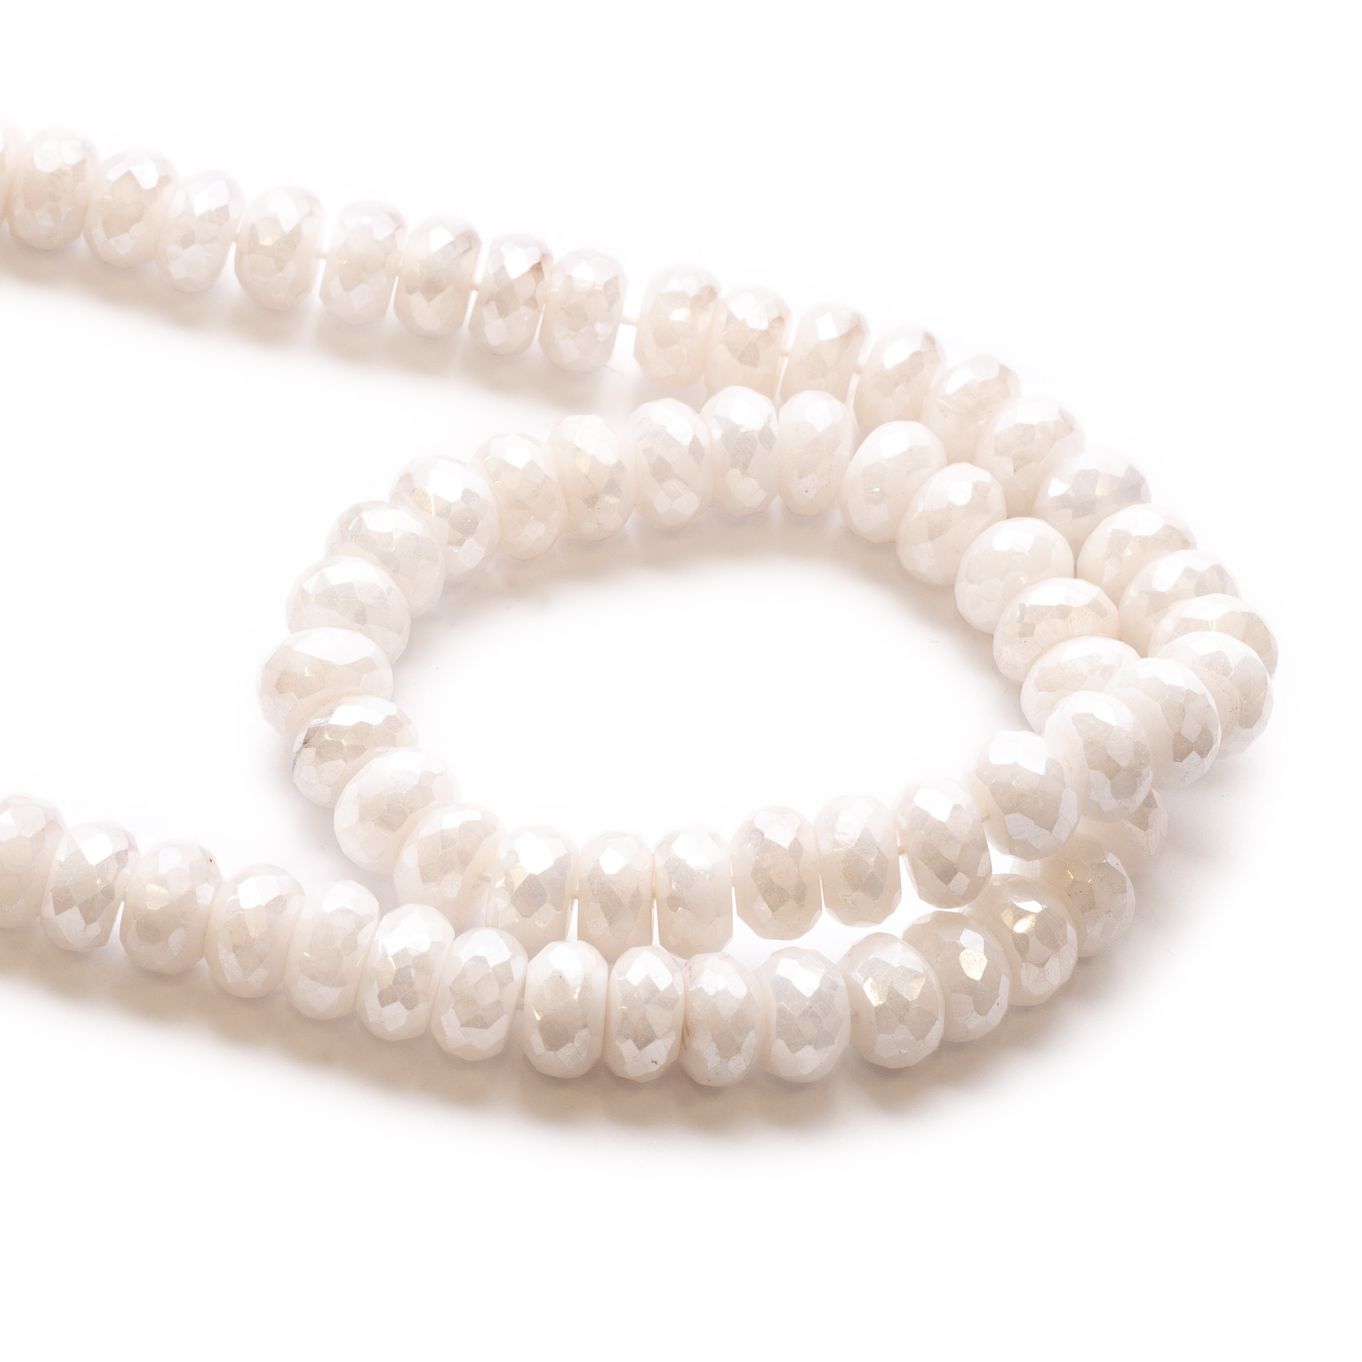 Mystic Coated White Moonstone Faceted Rondelle Beads -  Approx 8.5x5mm